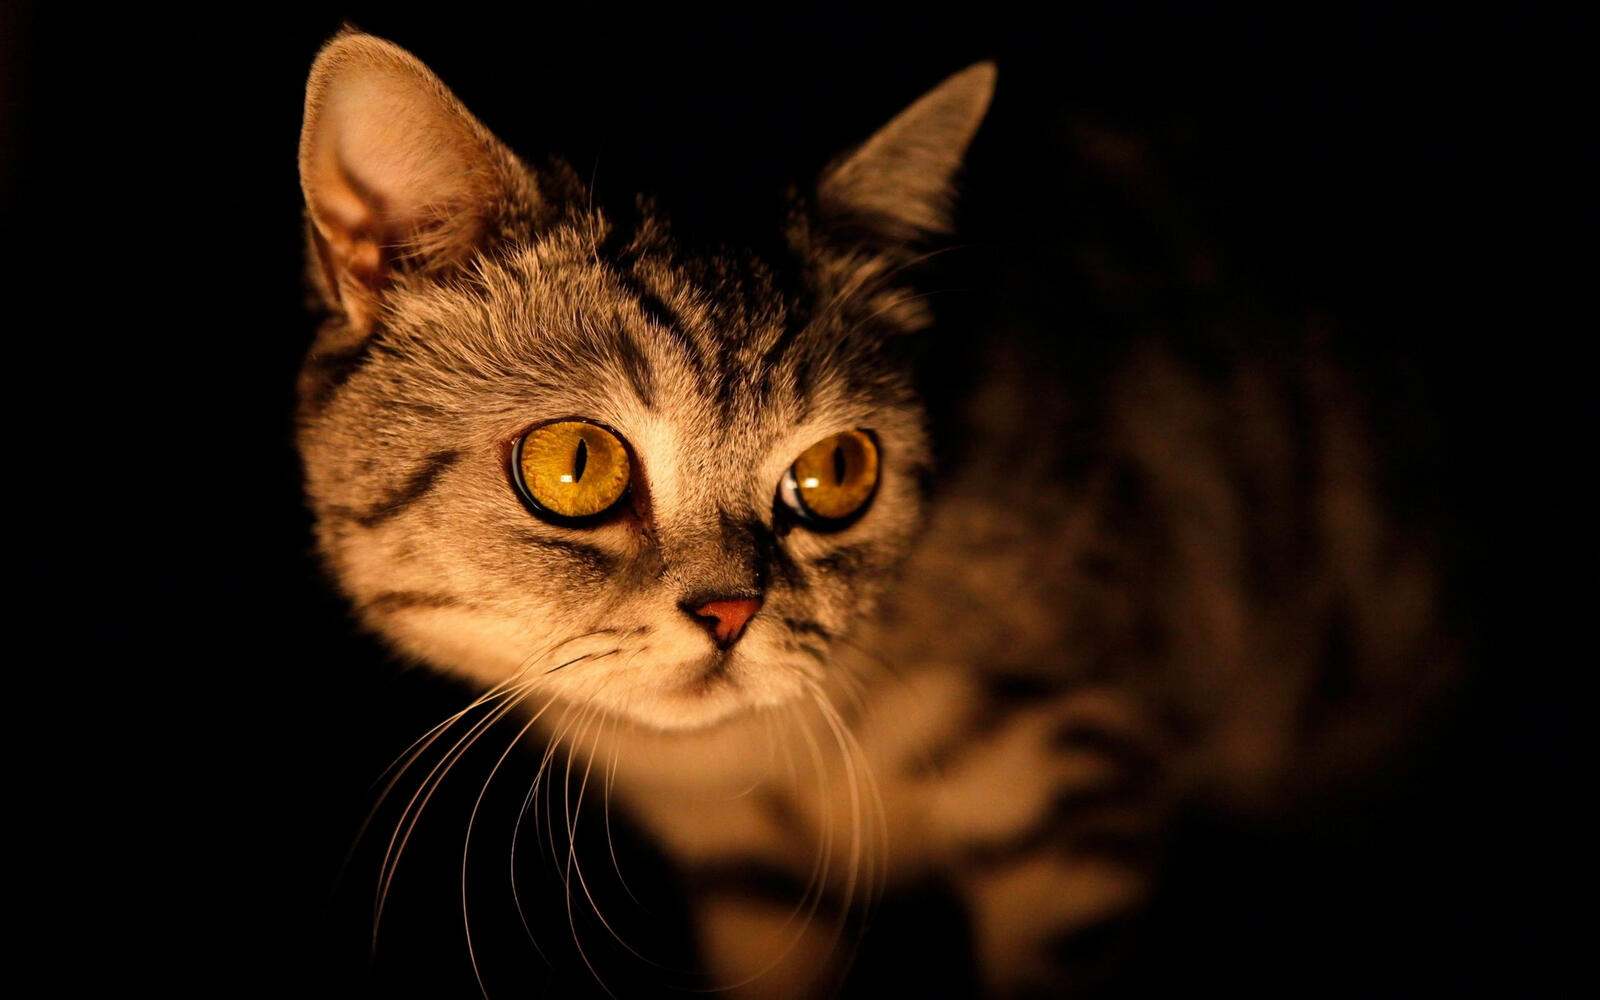 Wallpapers cat face darkness on the desktop